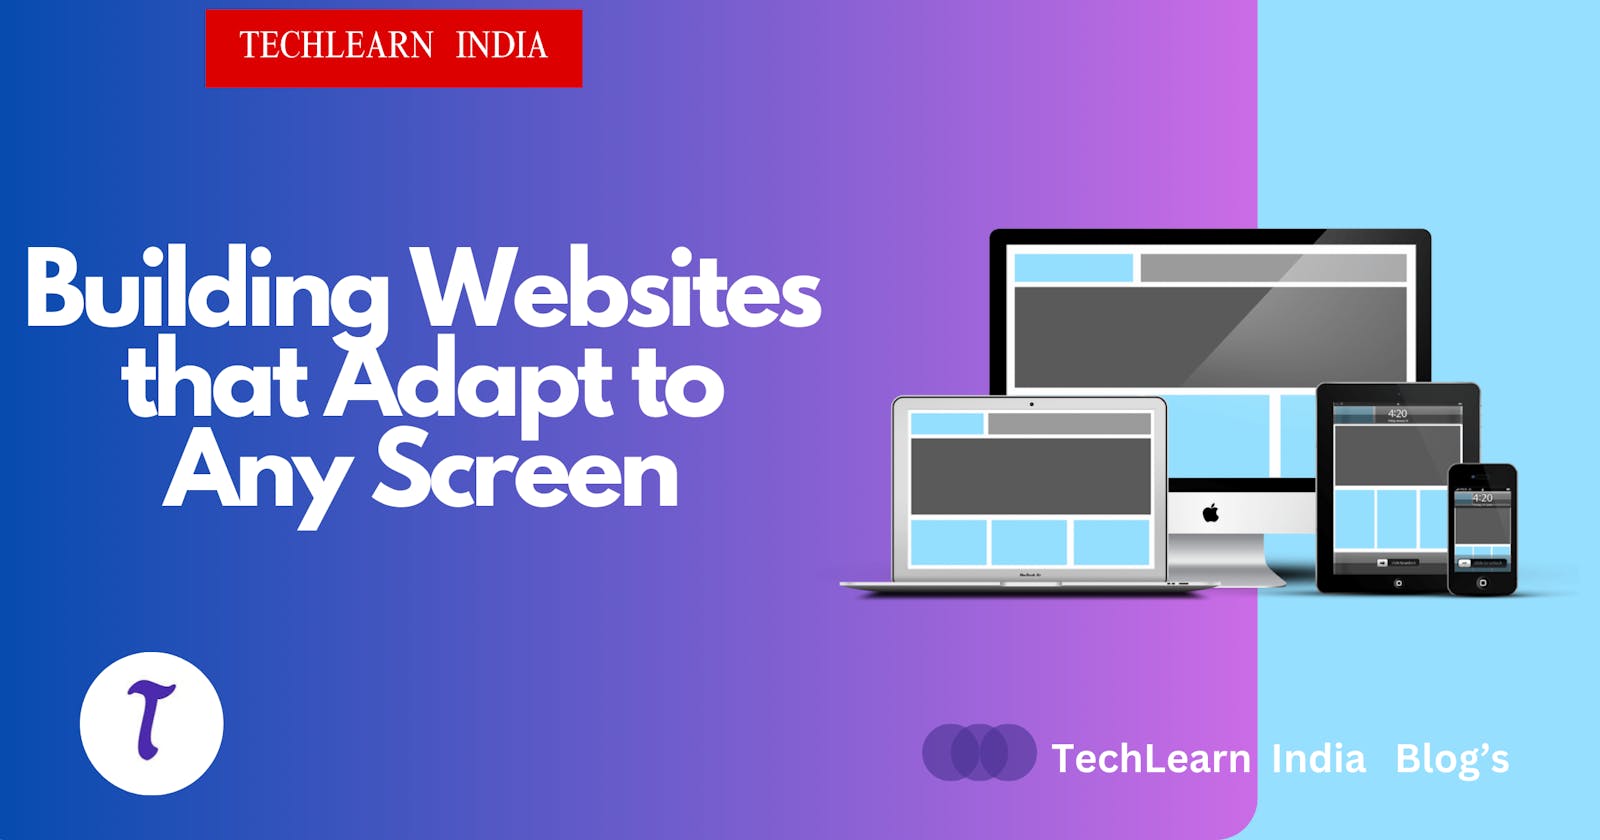 Responsive Design: Building Websites that Adapt to Any Screen